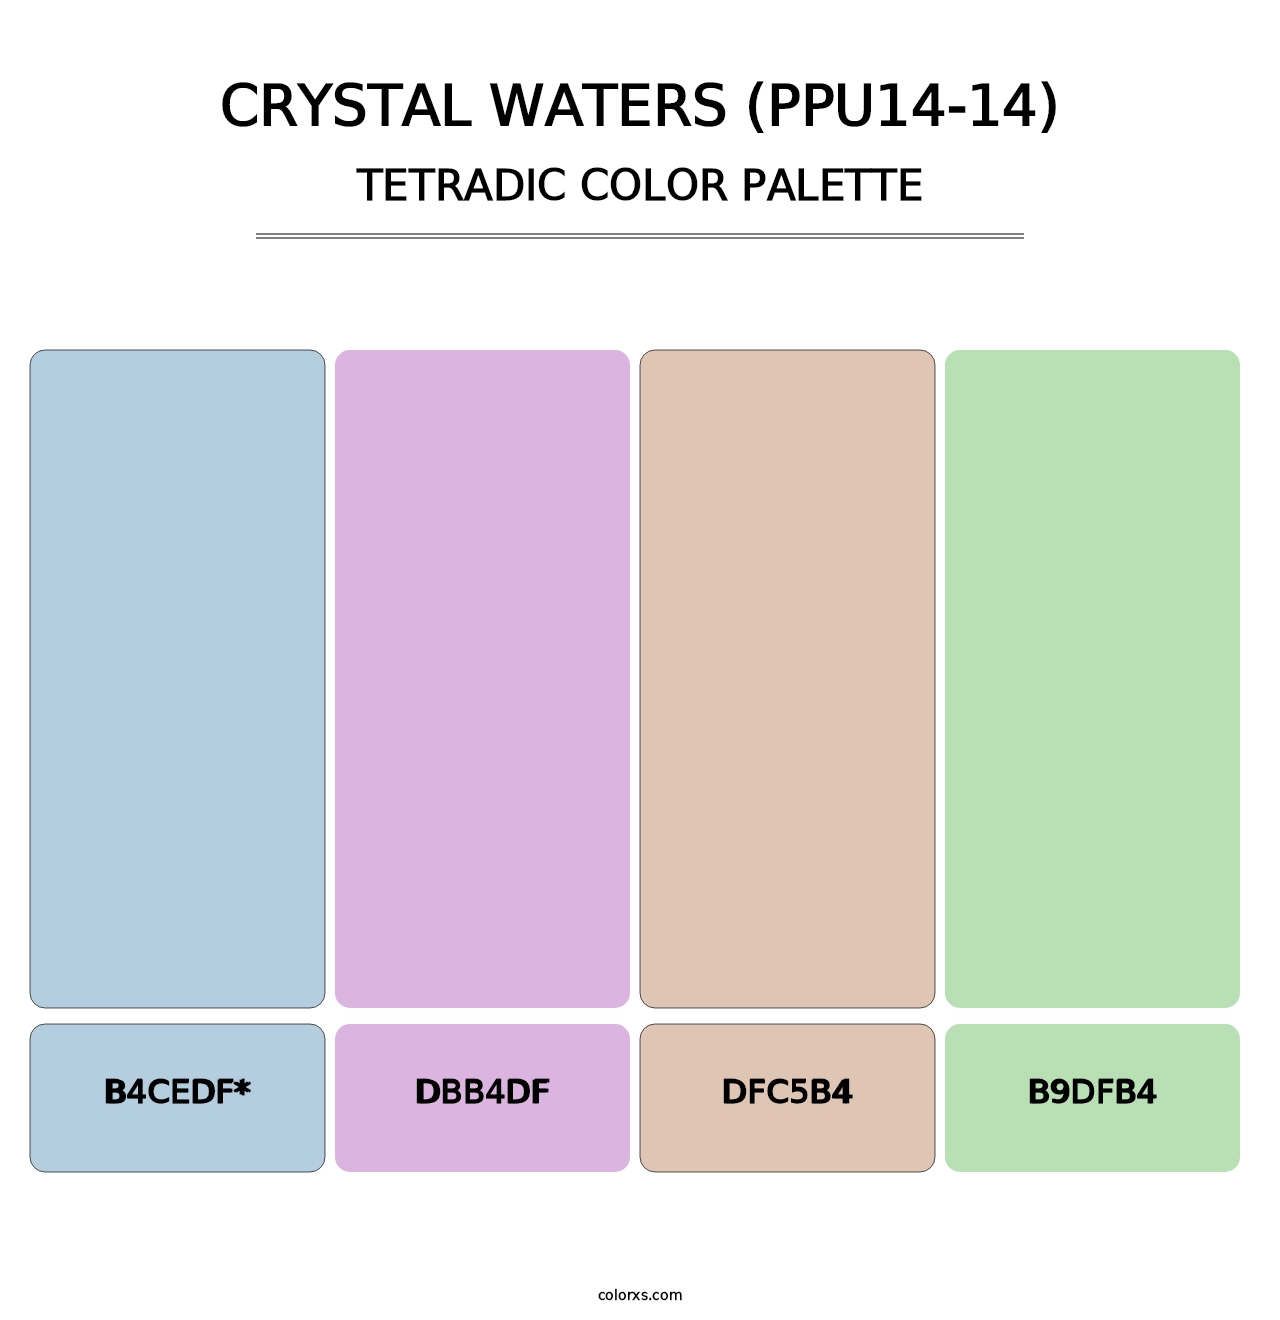 Crystal Waters (PPU14-14) - Tetradic Color Palette